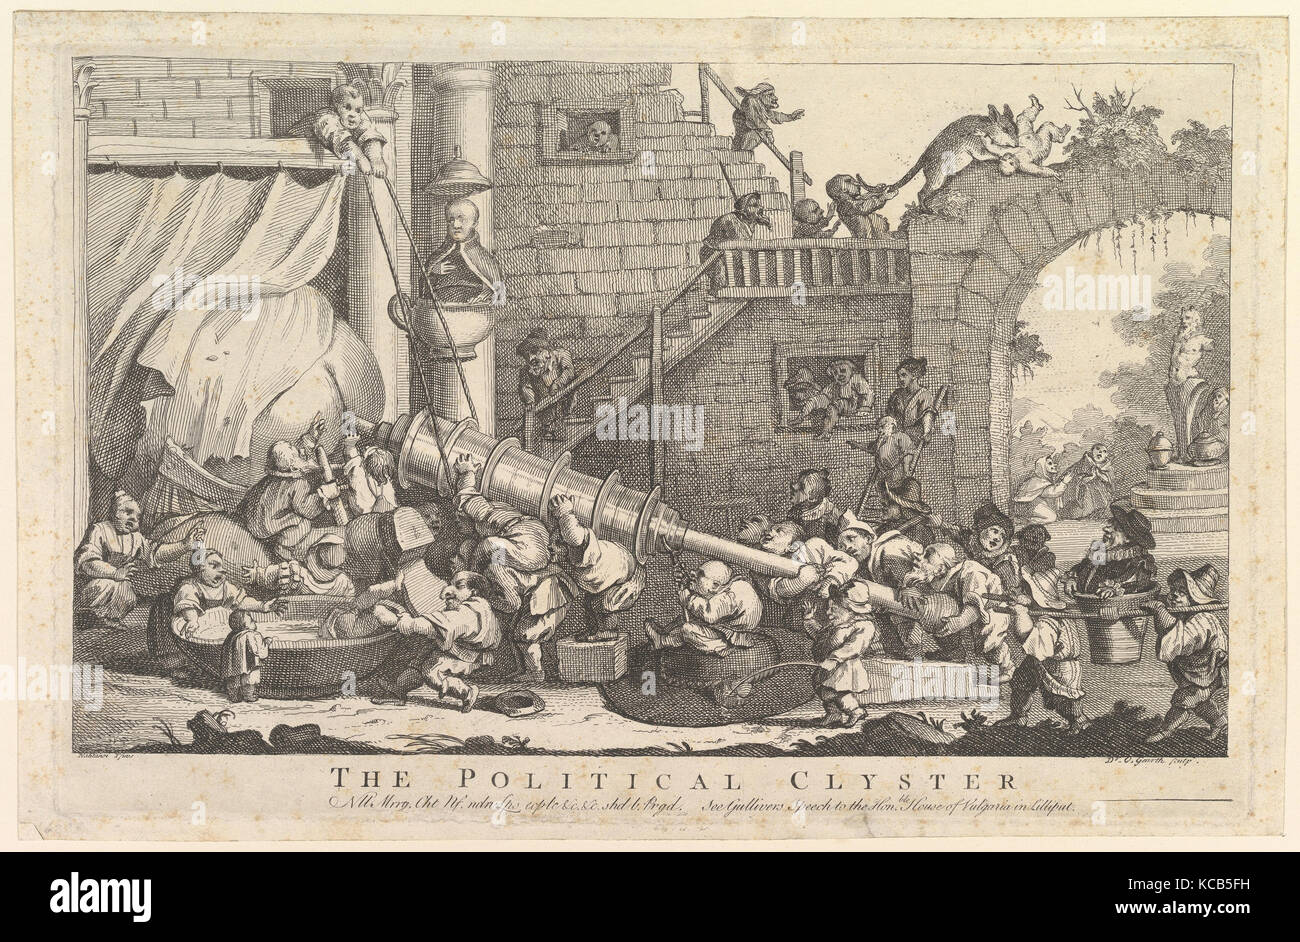 The Political Clyster, Derived from William Hogarth, January 1757 Stock Photo